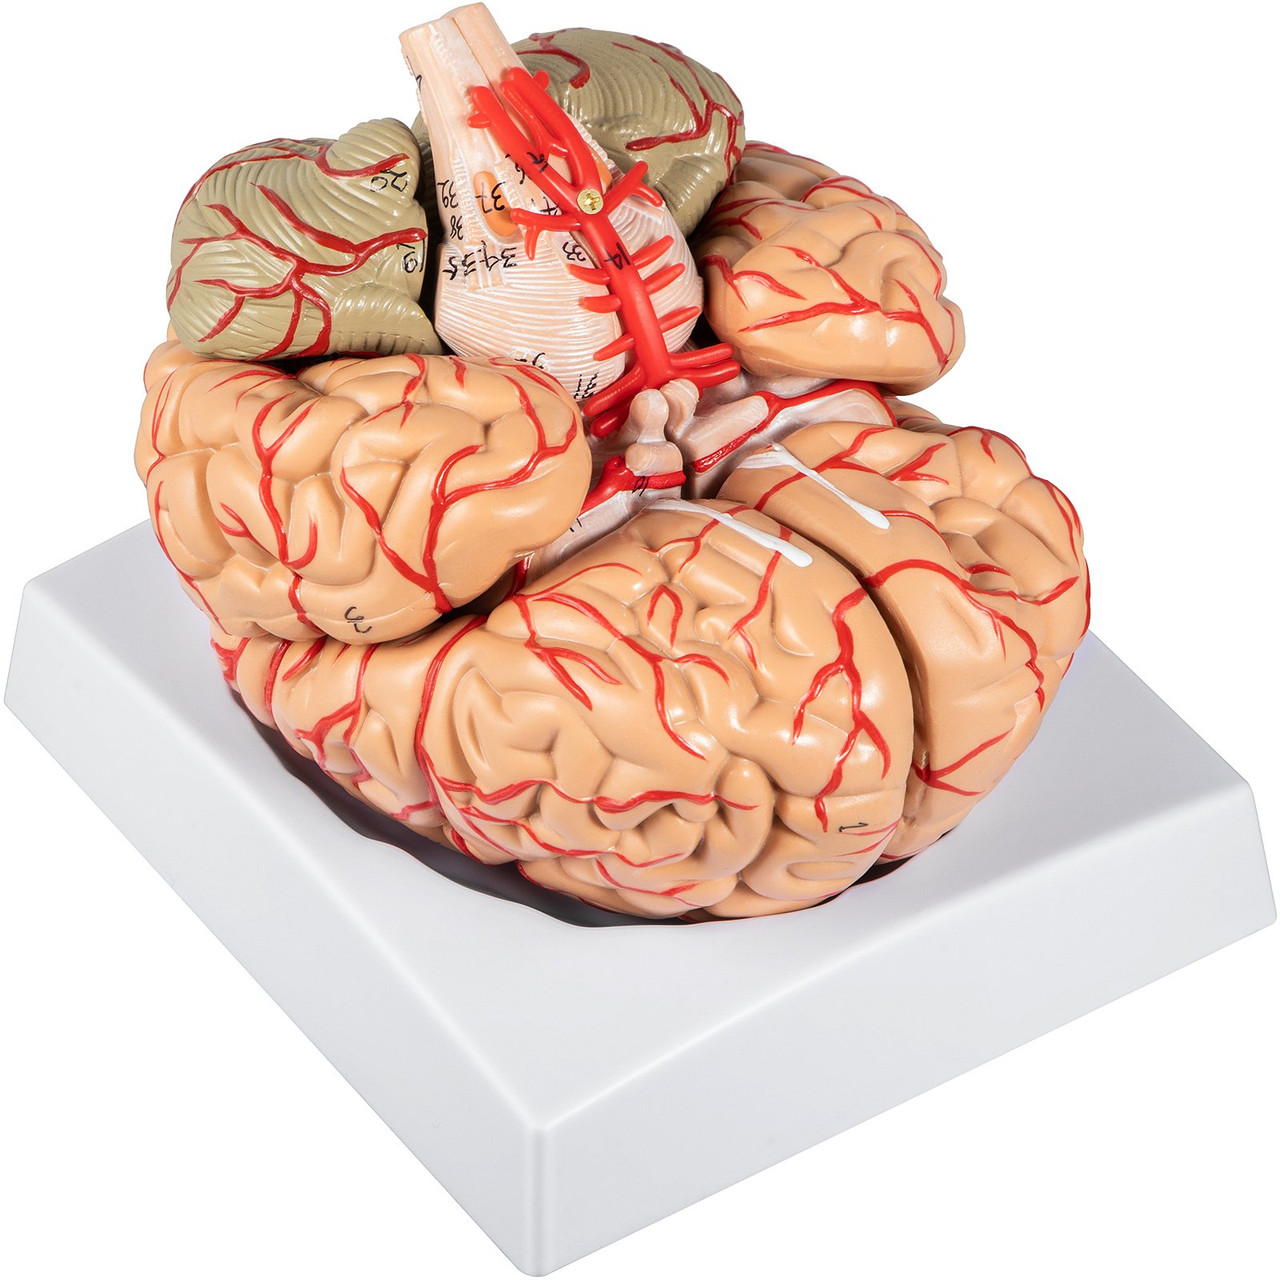 Human Brain Model Anatomy 9-Part Model of Brain w/Labels & Display Base Color-Coded Life Size Human Brain Anatomical Model Brain Teaching Tool Brain Model for Science Classroom Study Display